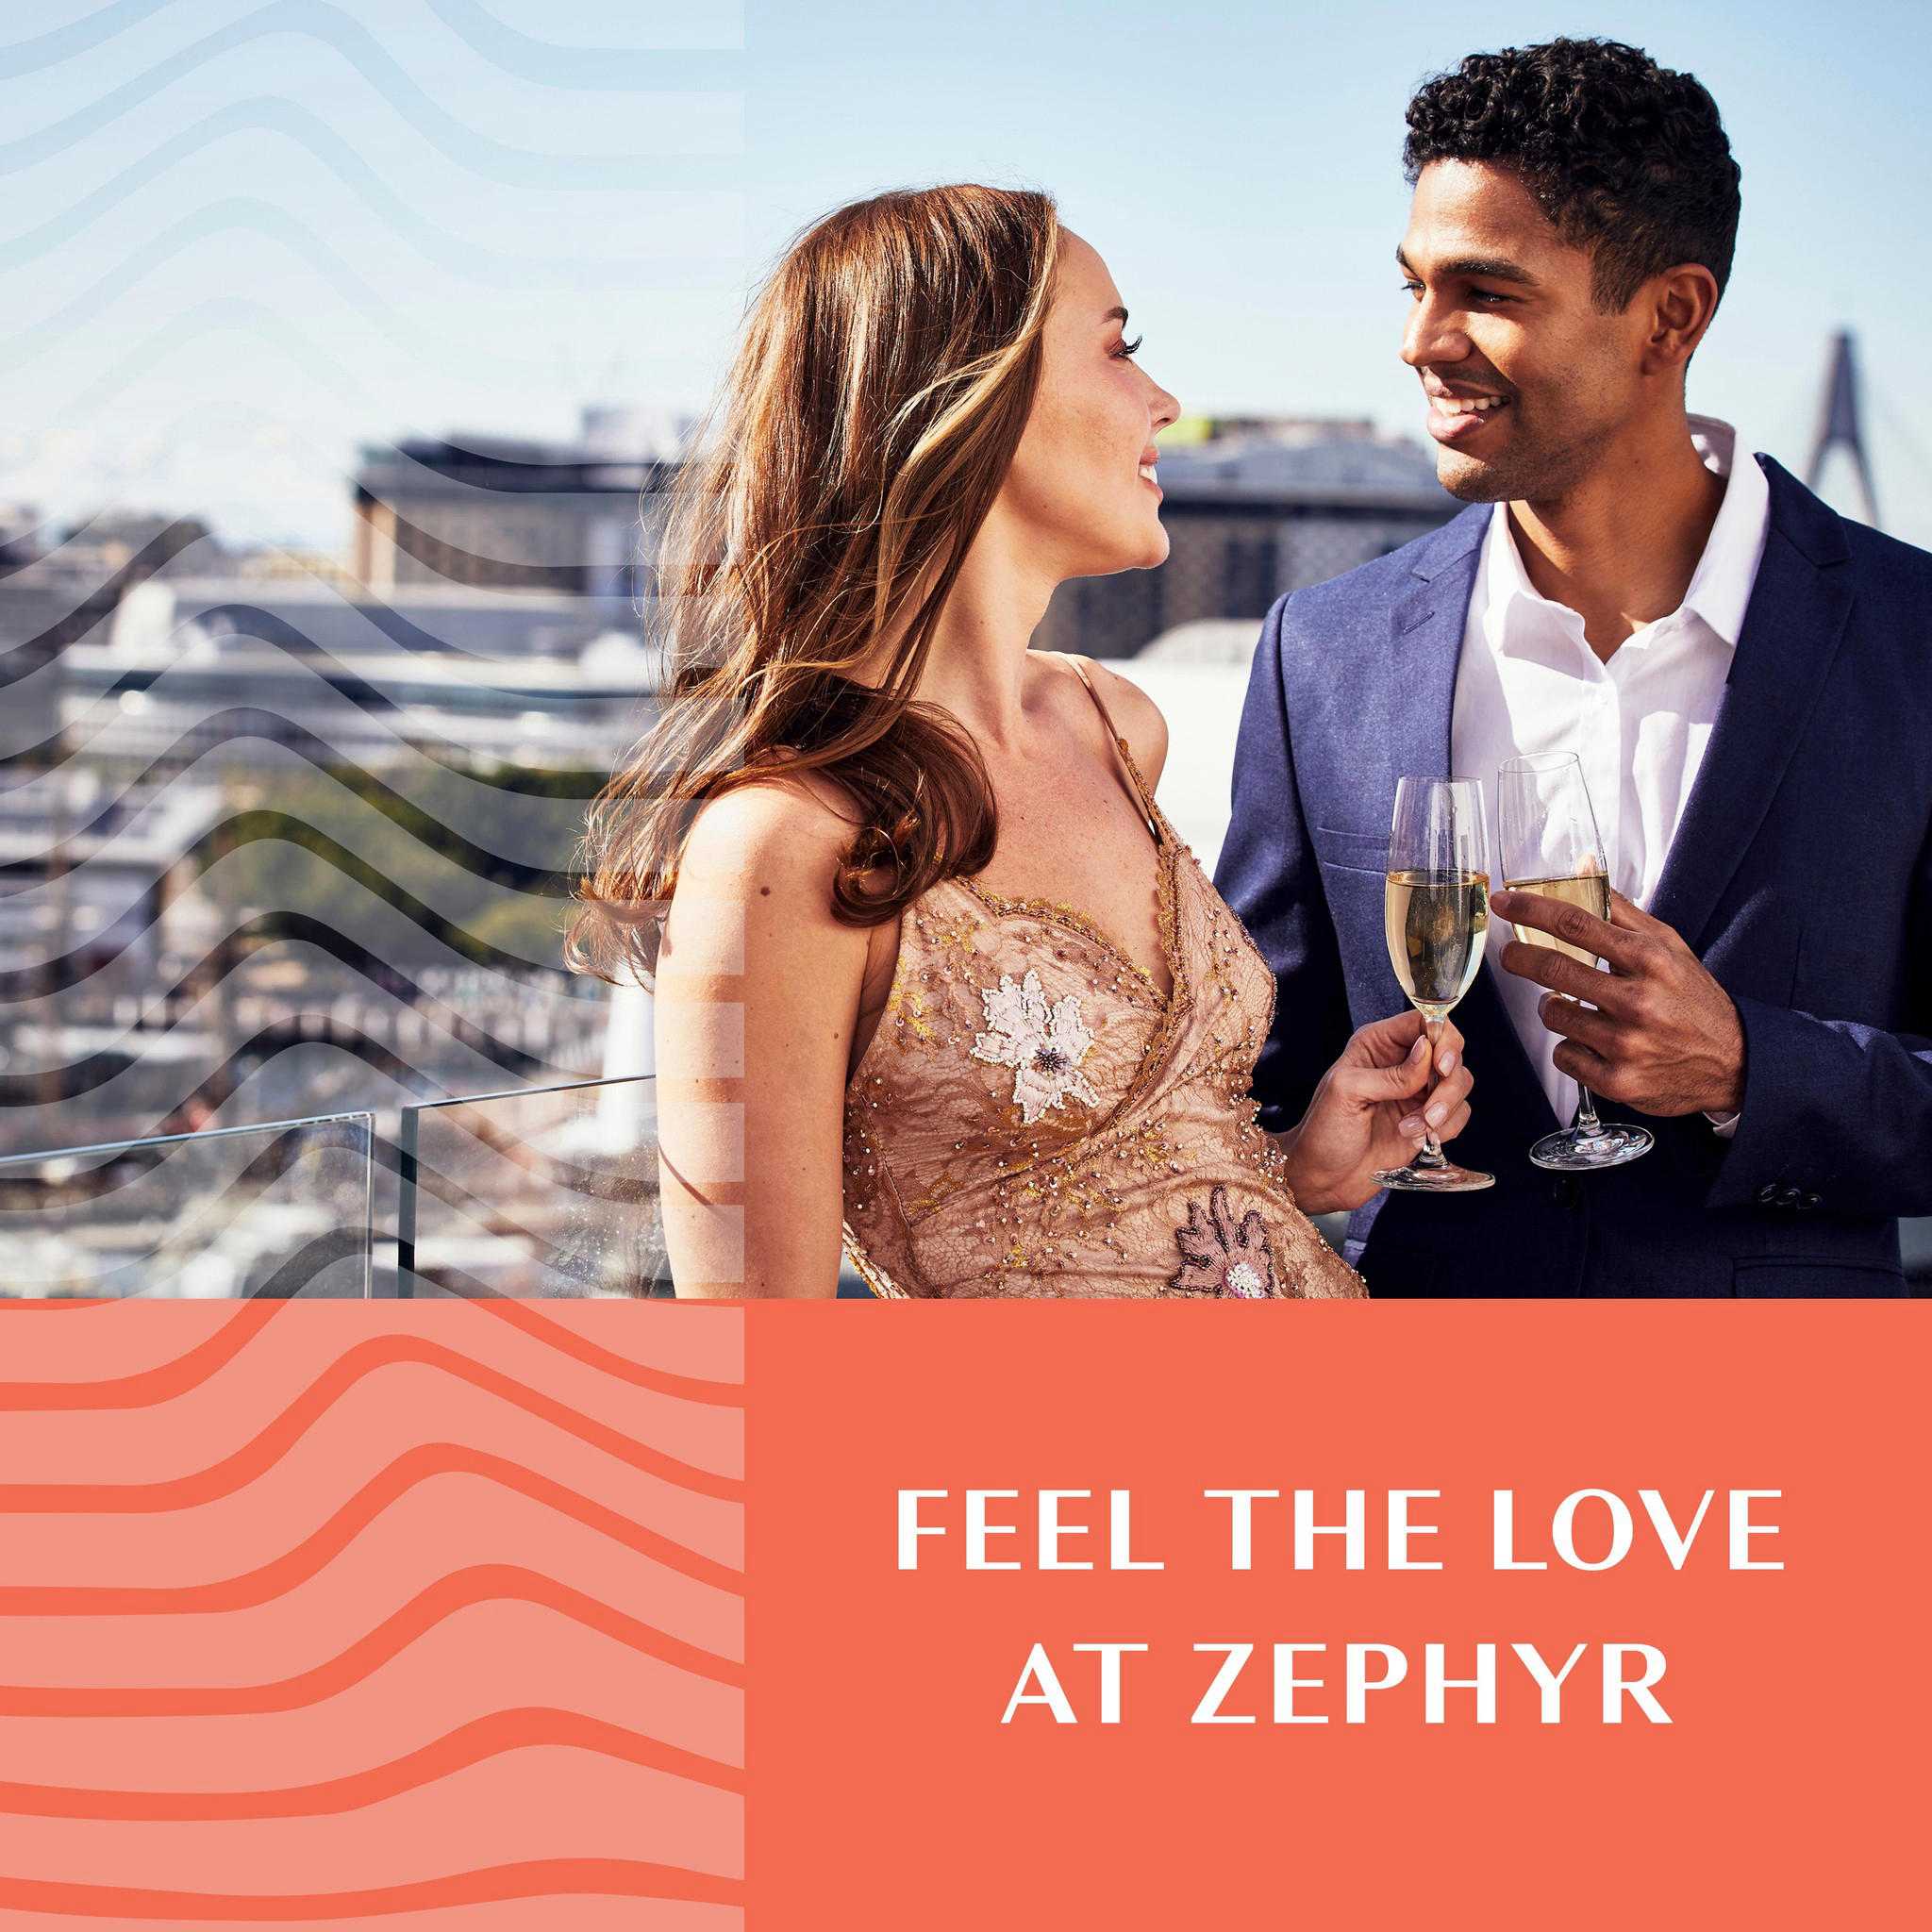 To celebrate Valentine’s Day, #zephyrbarsyd is feeling the love and pouring three limited-edition co